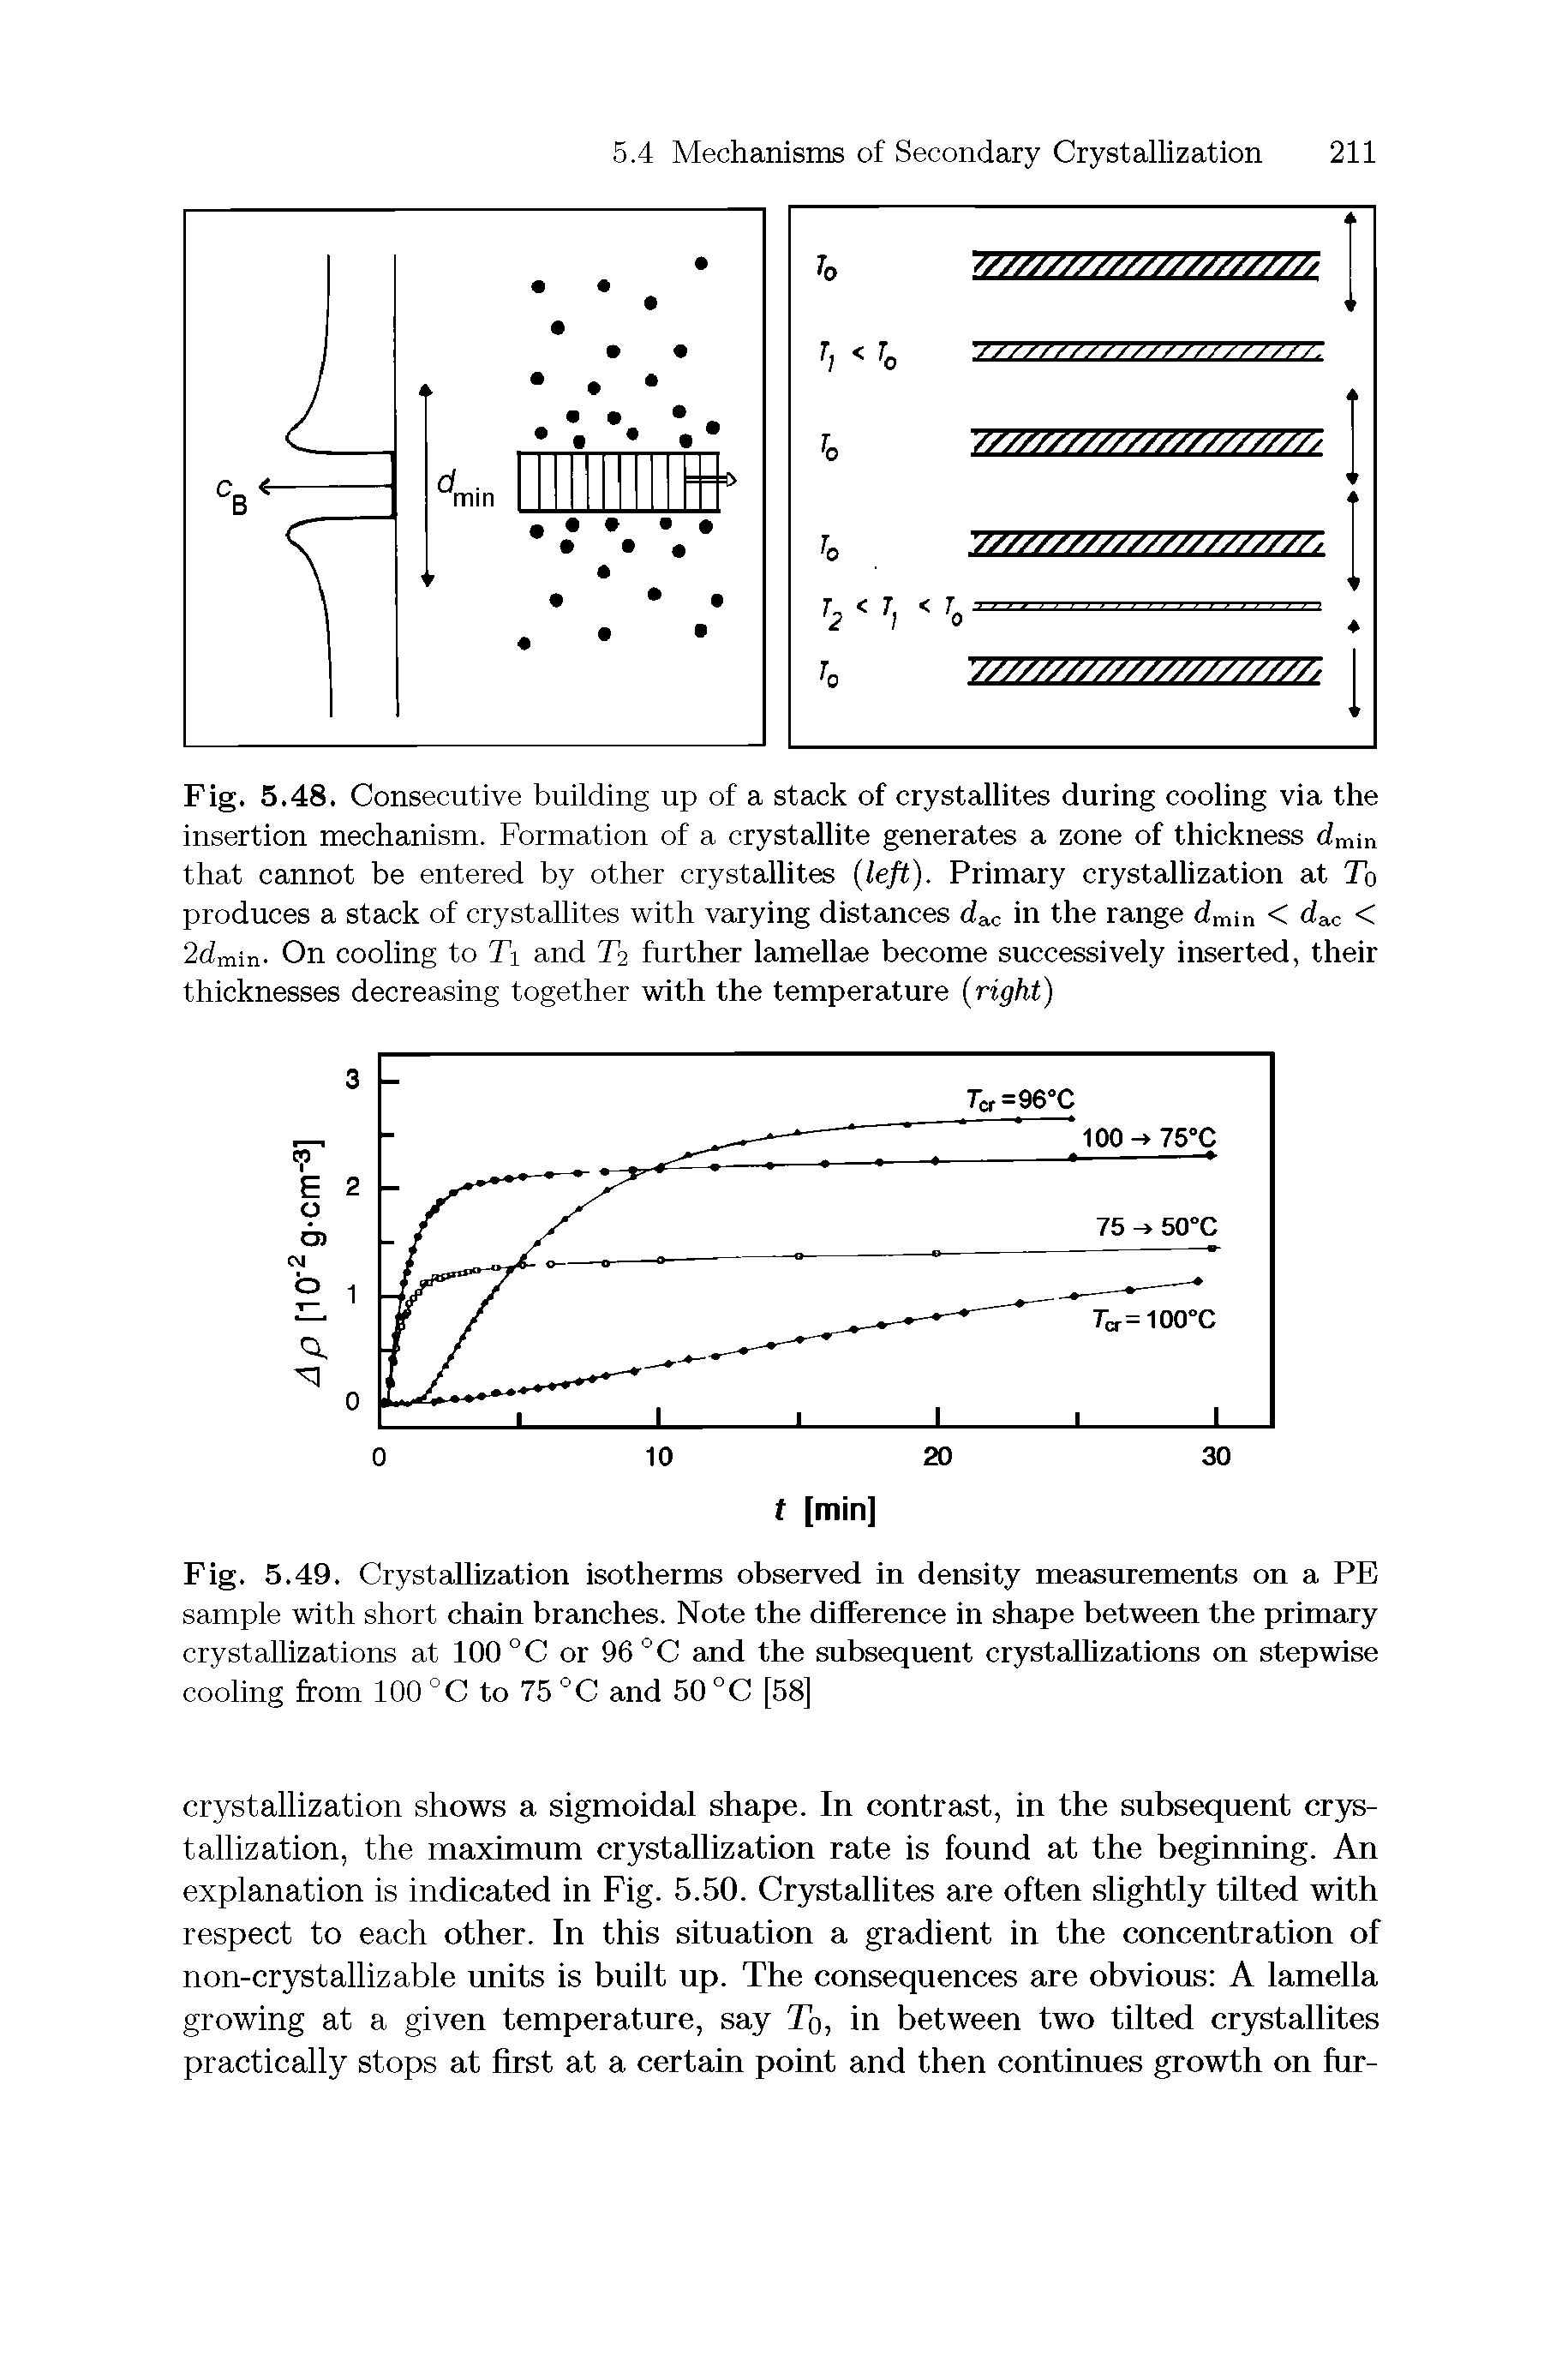 Fig. 5.49. Crystallization isotherms observed in density measurements on a PE sample with short chain branches. Note the difference in shape between the primary crystallizations at 100 °C or 96 °C and the subsequent crystallizations on stepwise cooling from 100 °C to 75 °C and 50 °C [58]...